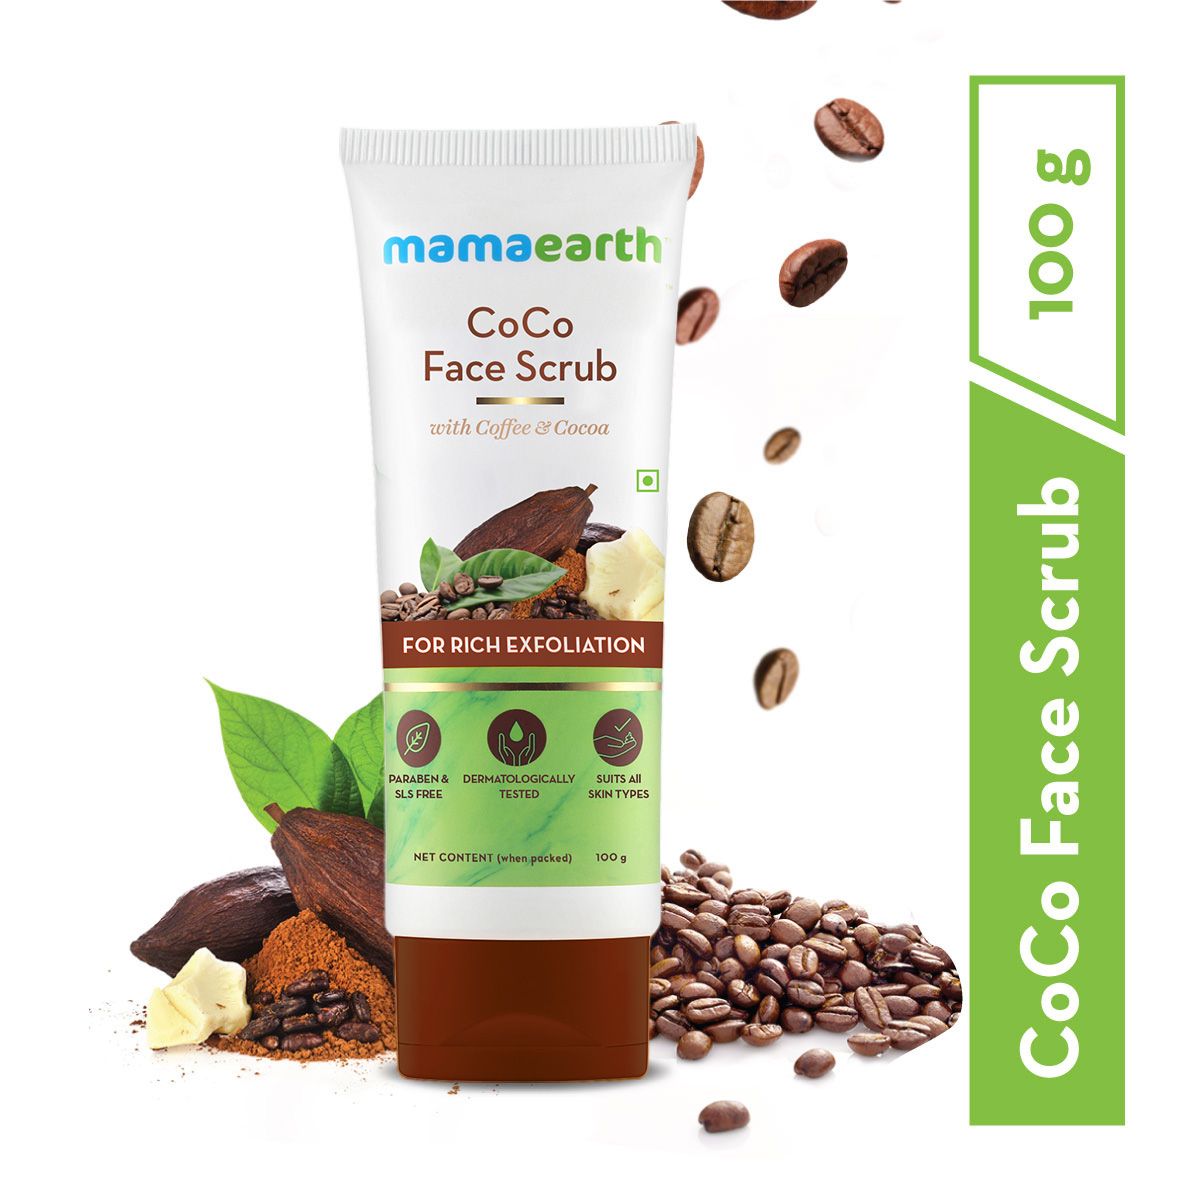 Mamaearth CoCo Face Scrub with Coffee & Cocoa Better Than Other Options Available in the Market